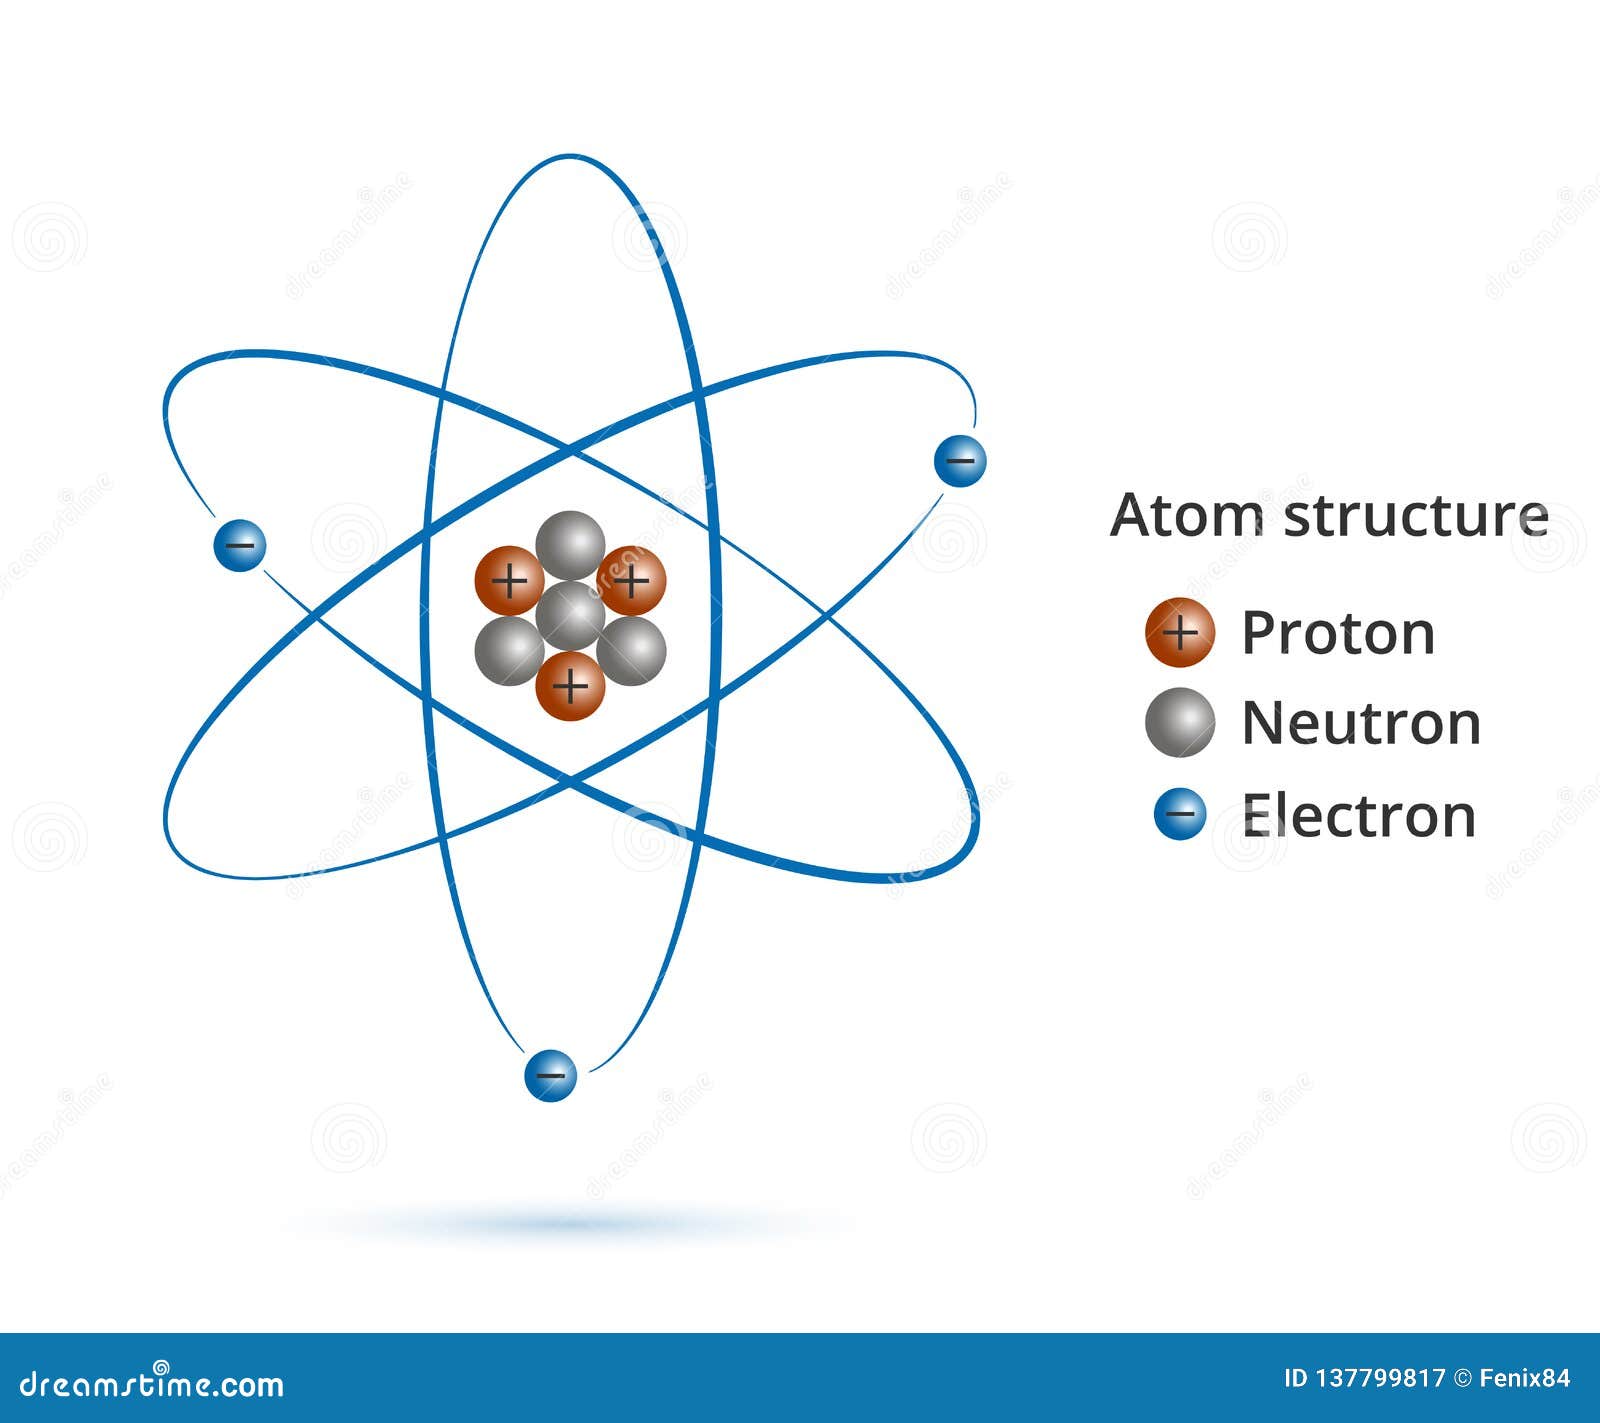 structure of the nucleus of the atom: protons, neutrons, electrons and gamma waves.  model of atom